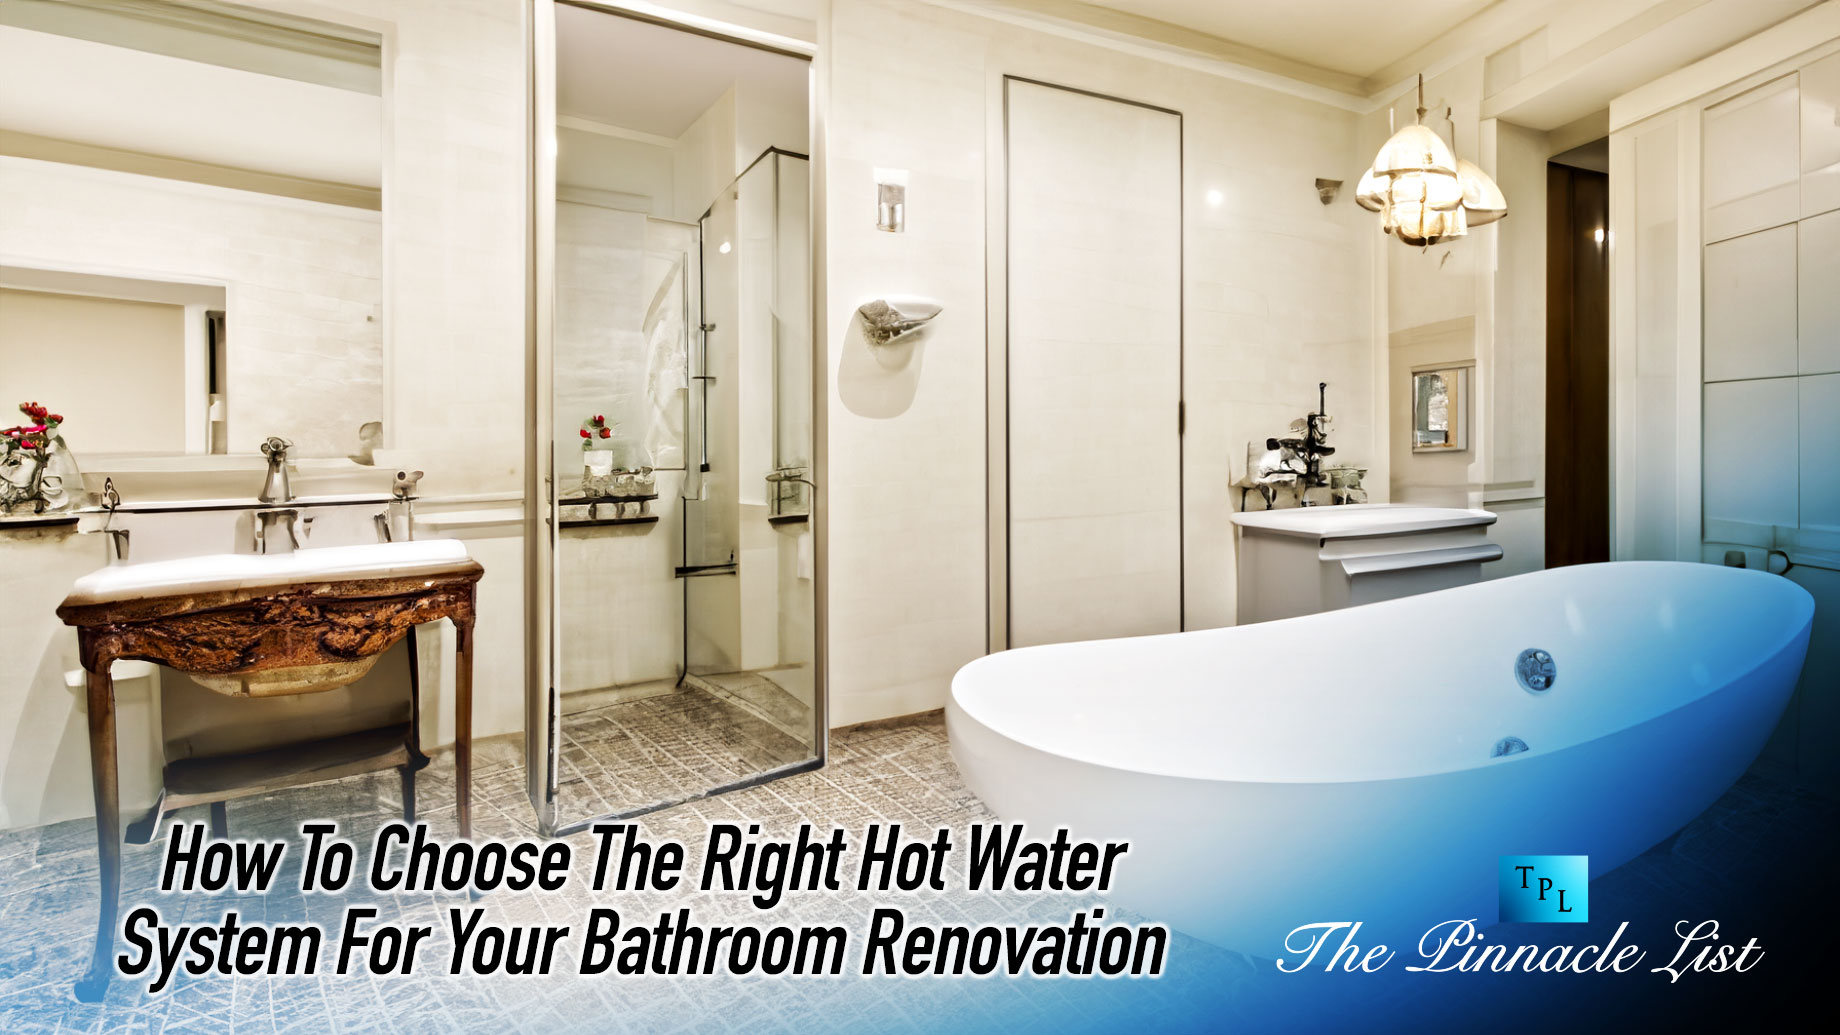 How To Choose The Right Hot Water System For Your Bathroom Renovation